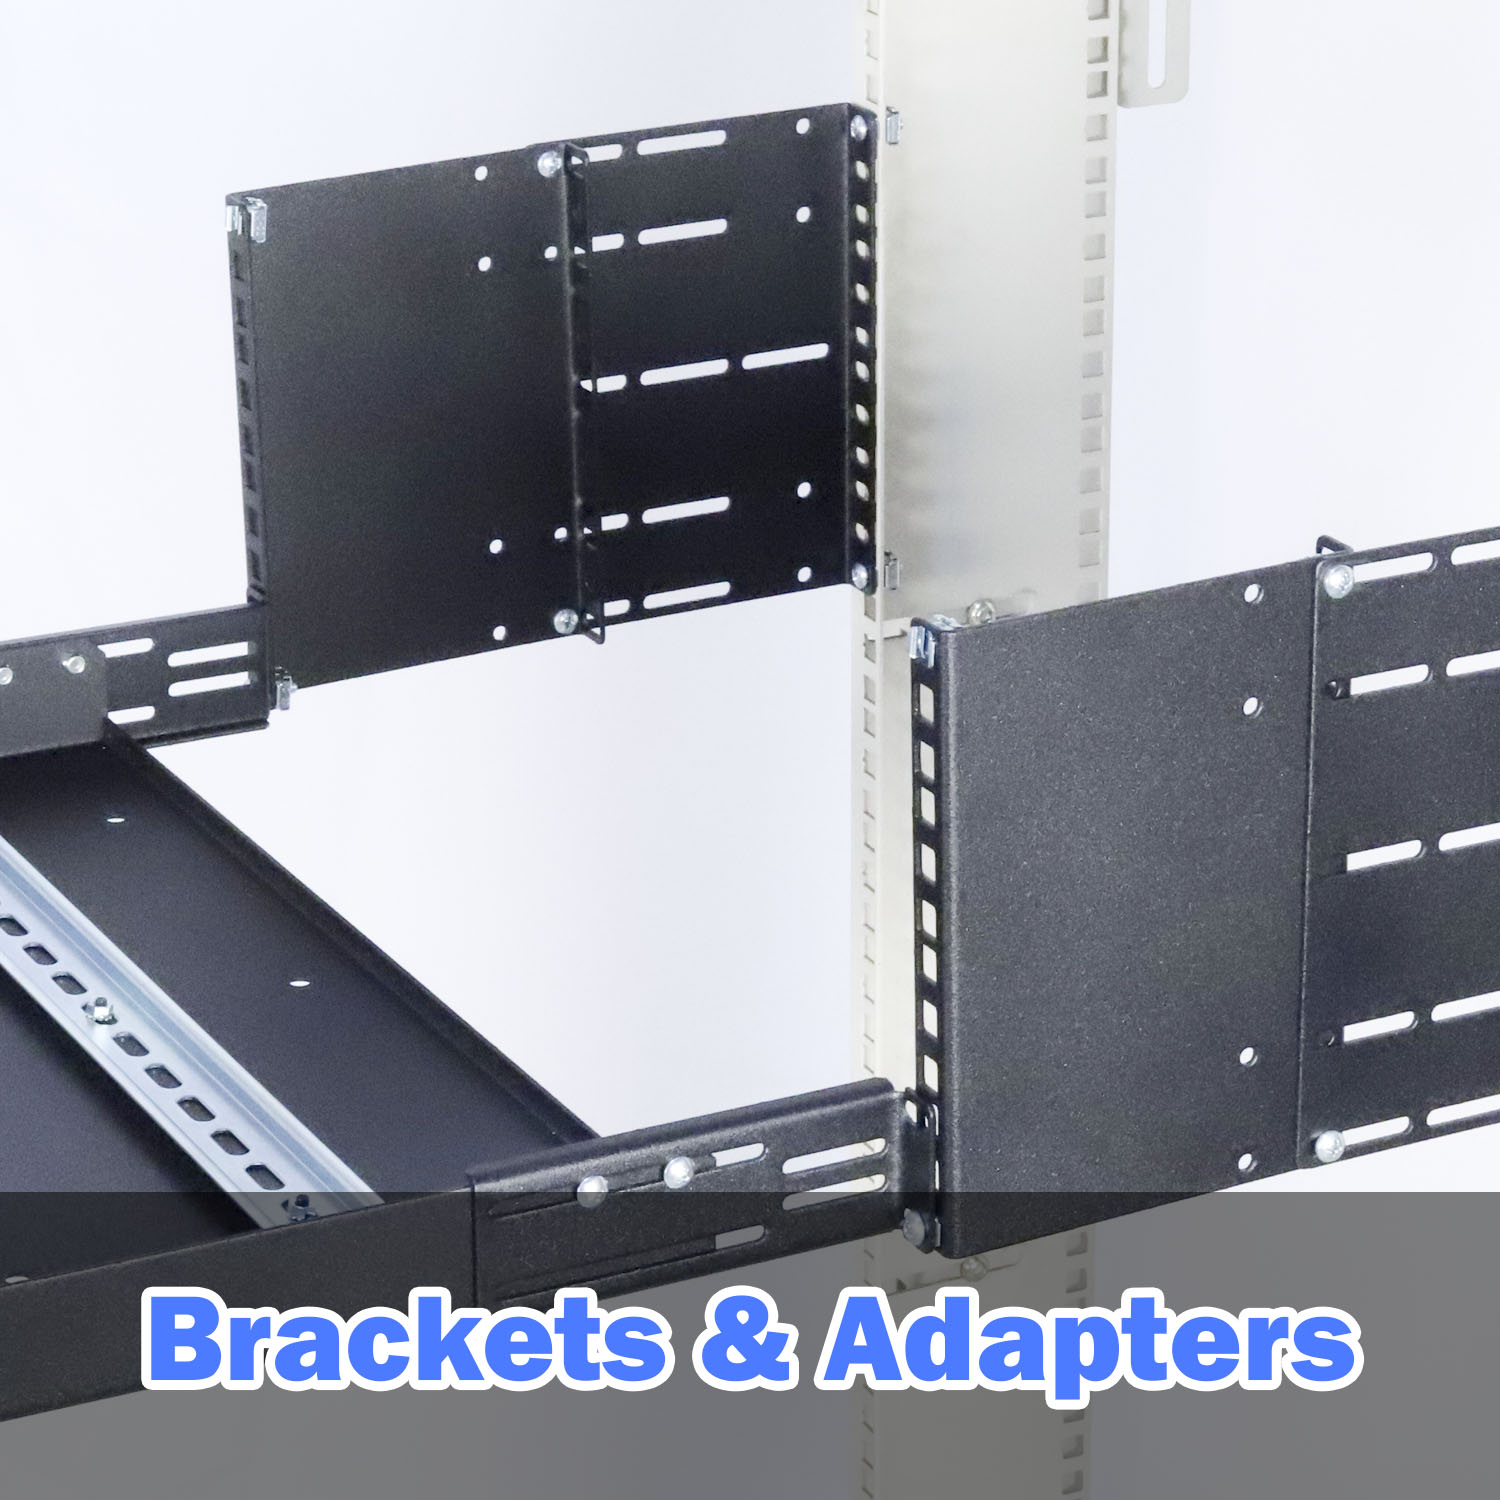 Rackmount Brackets and Adapters